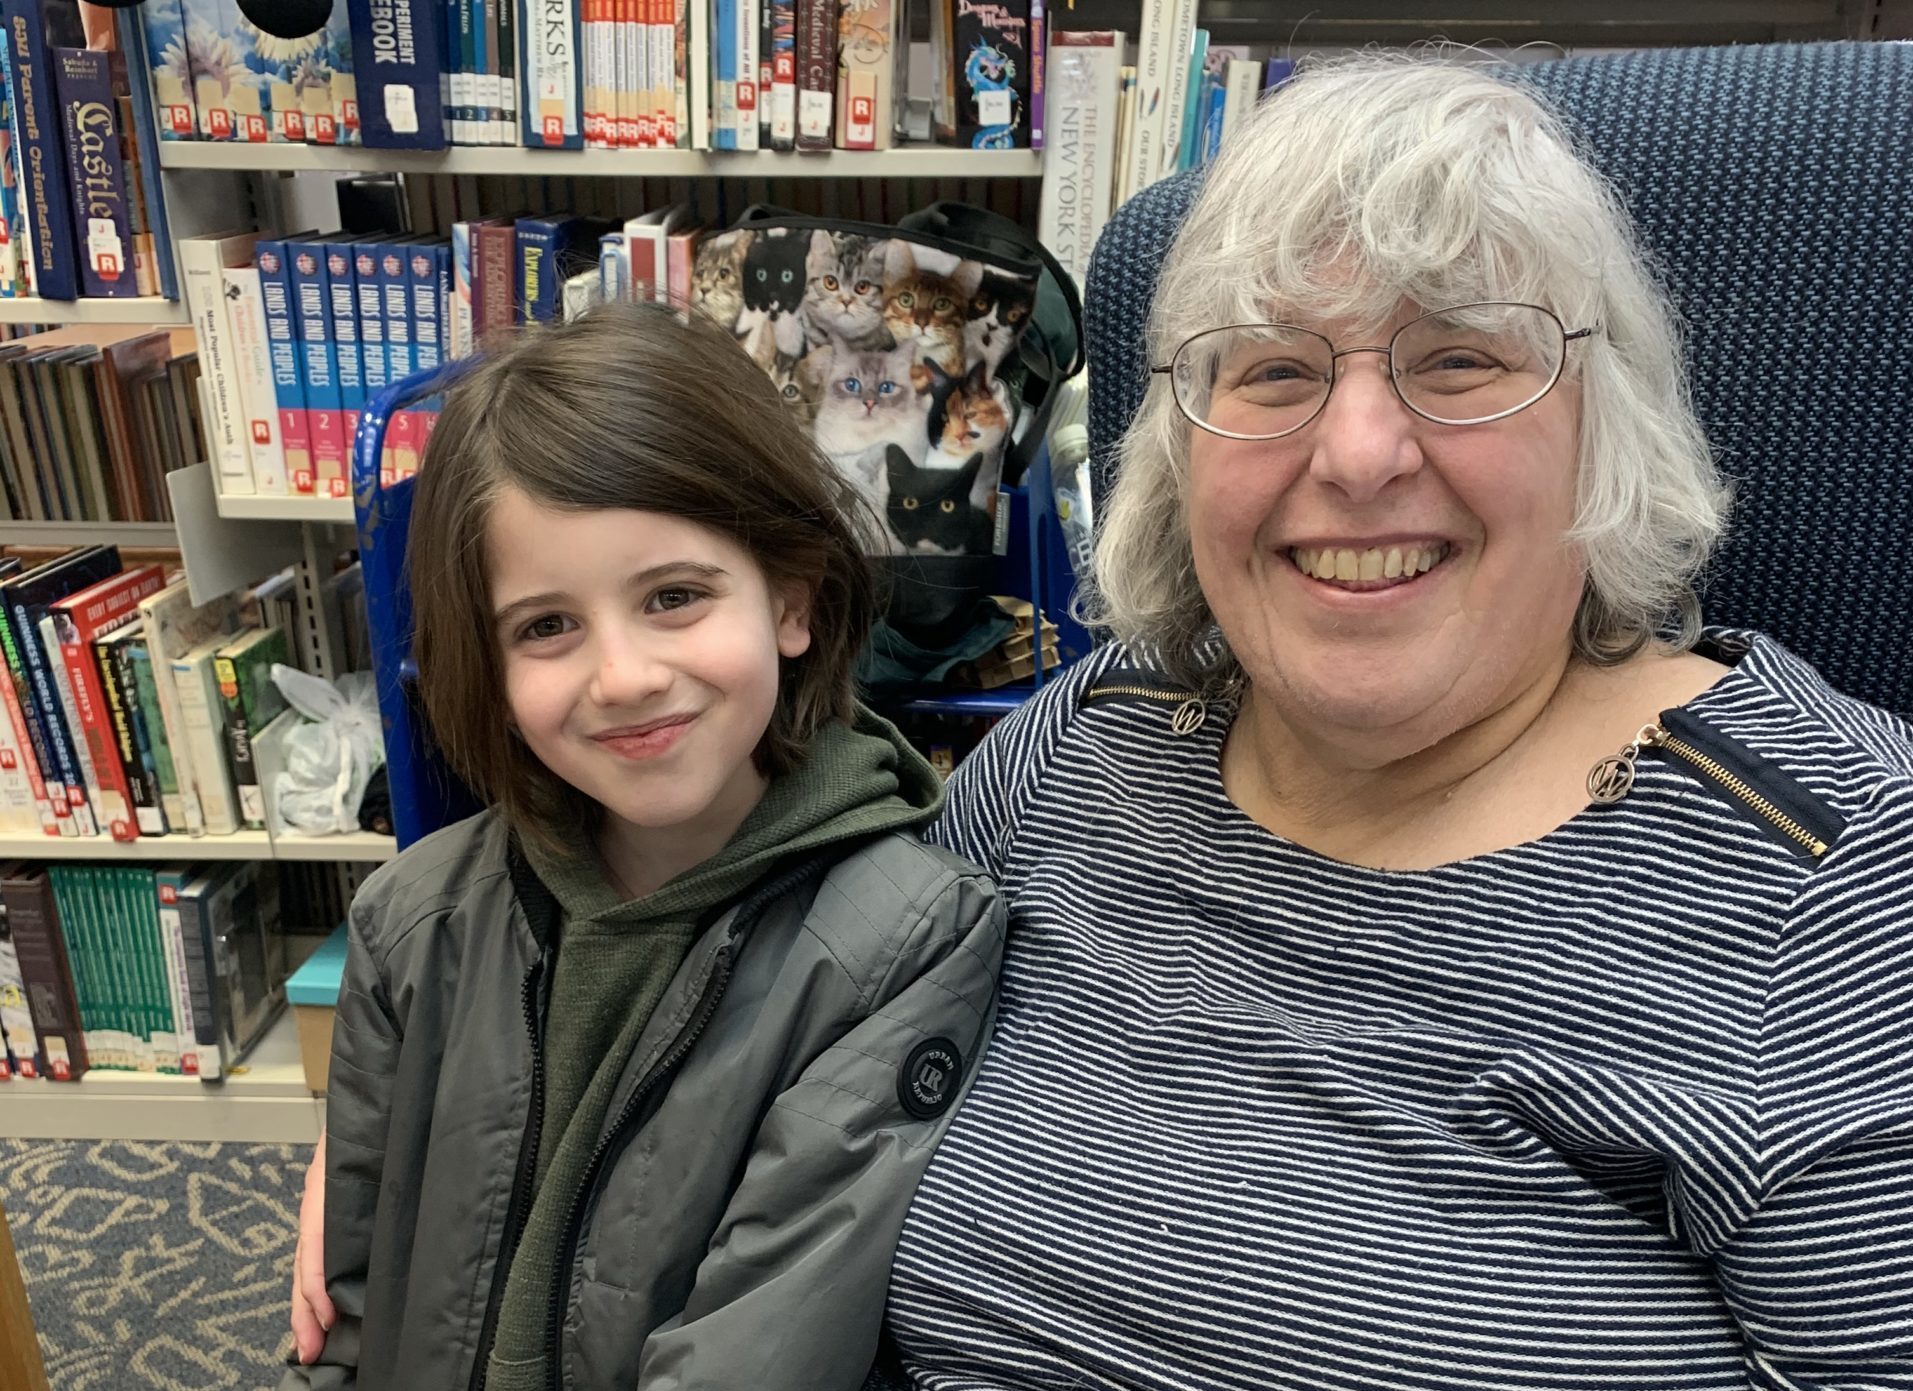 Children's librarian, Faye Lieberman and one of the boys who frequents her library